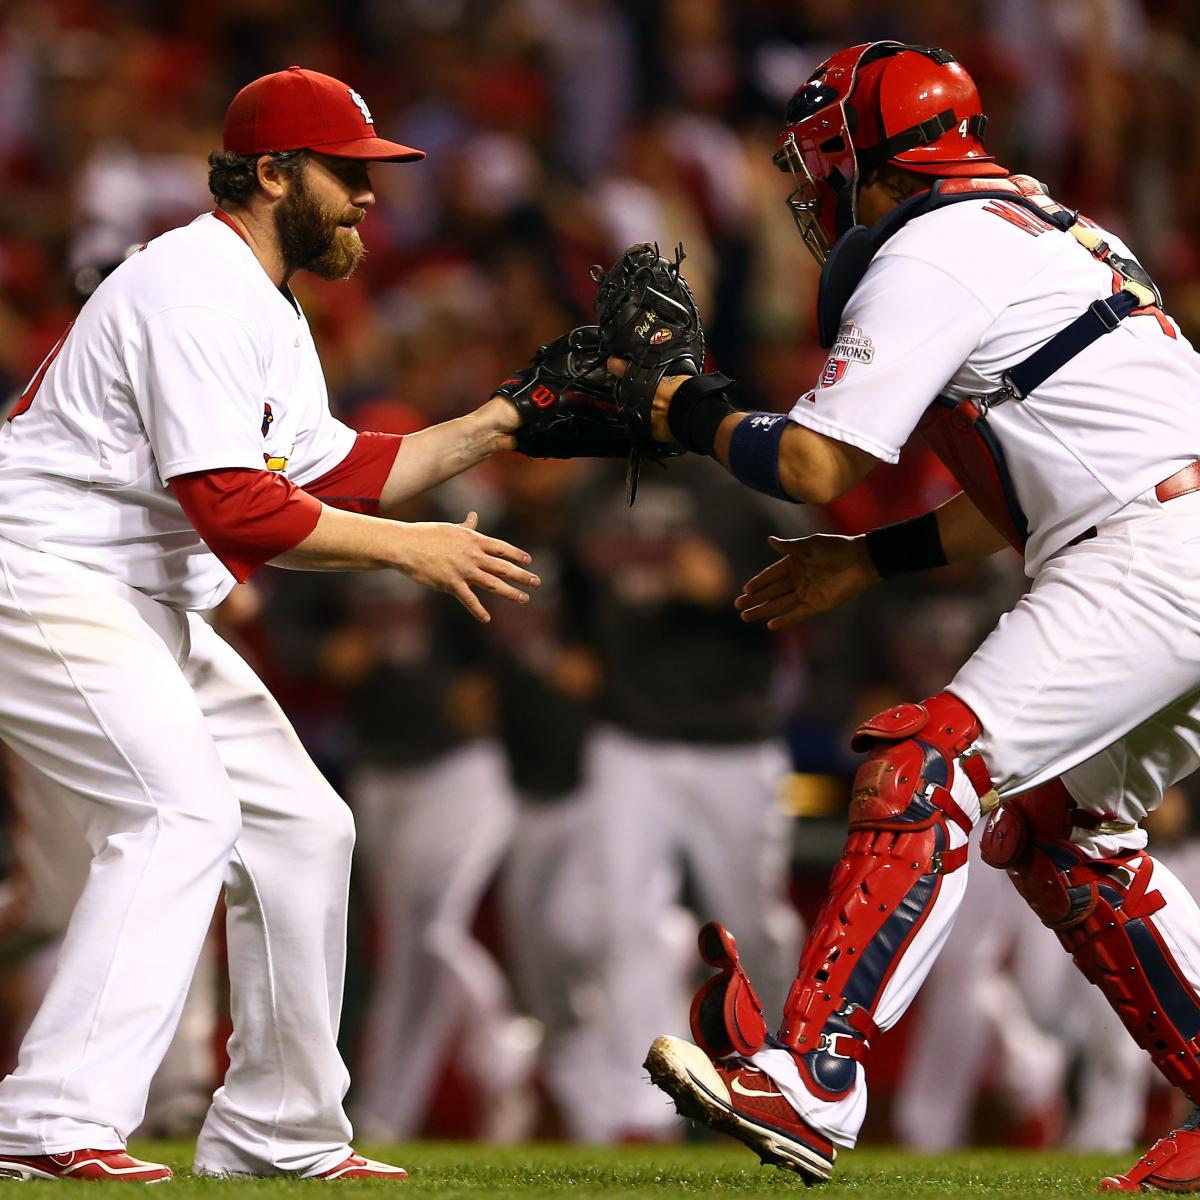 MLB Playoffs: Previewing the Cardinals vs. Giants Game 4 | Bleacher Report | Latest News, Videos ...